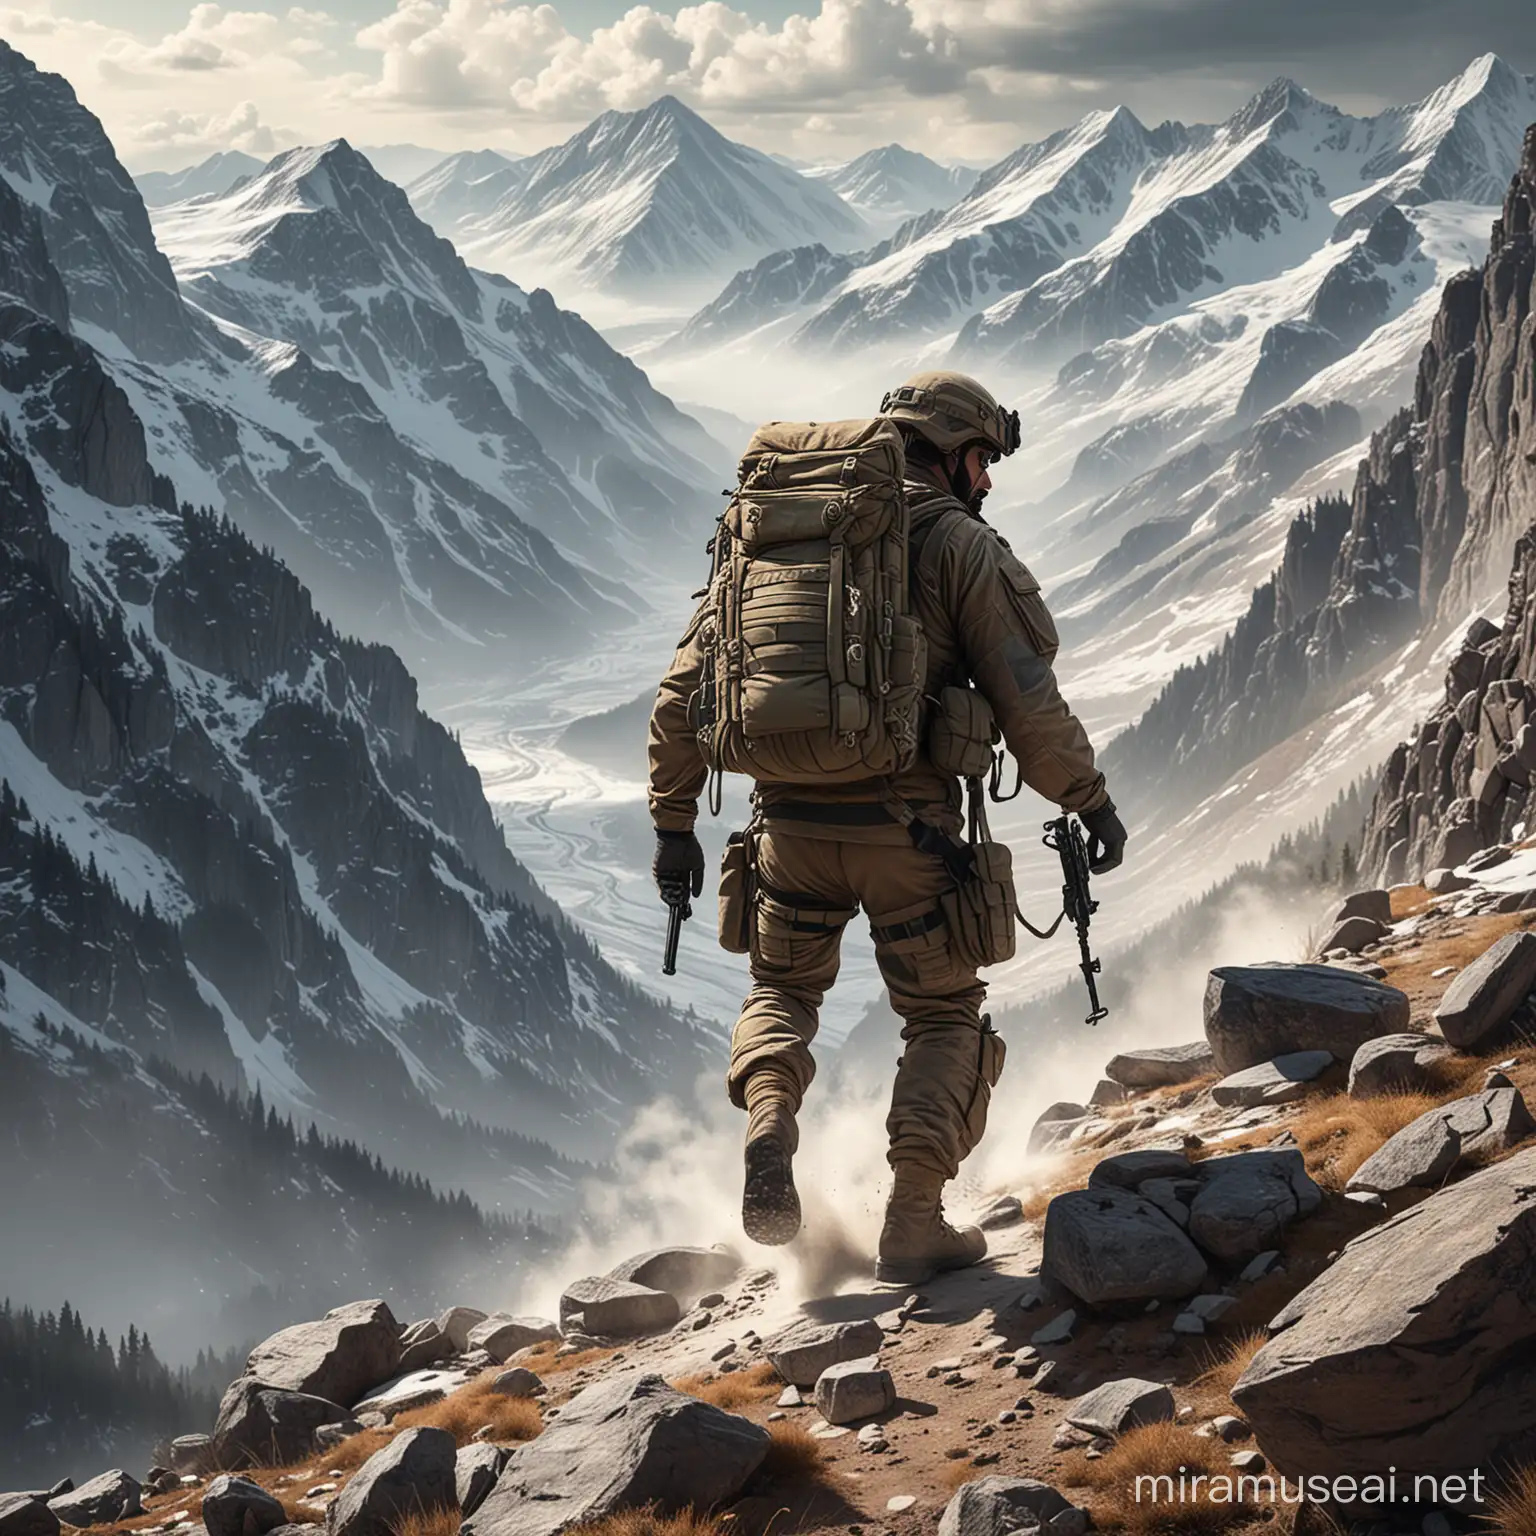 Illustration of an Army Special Forces soldier carrying out a mountain operation